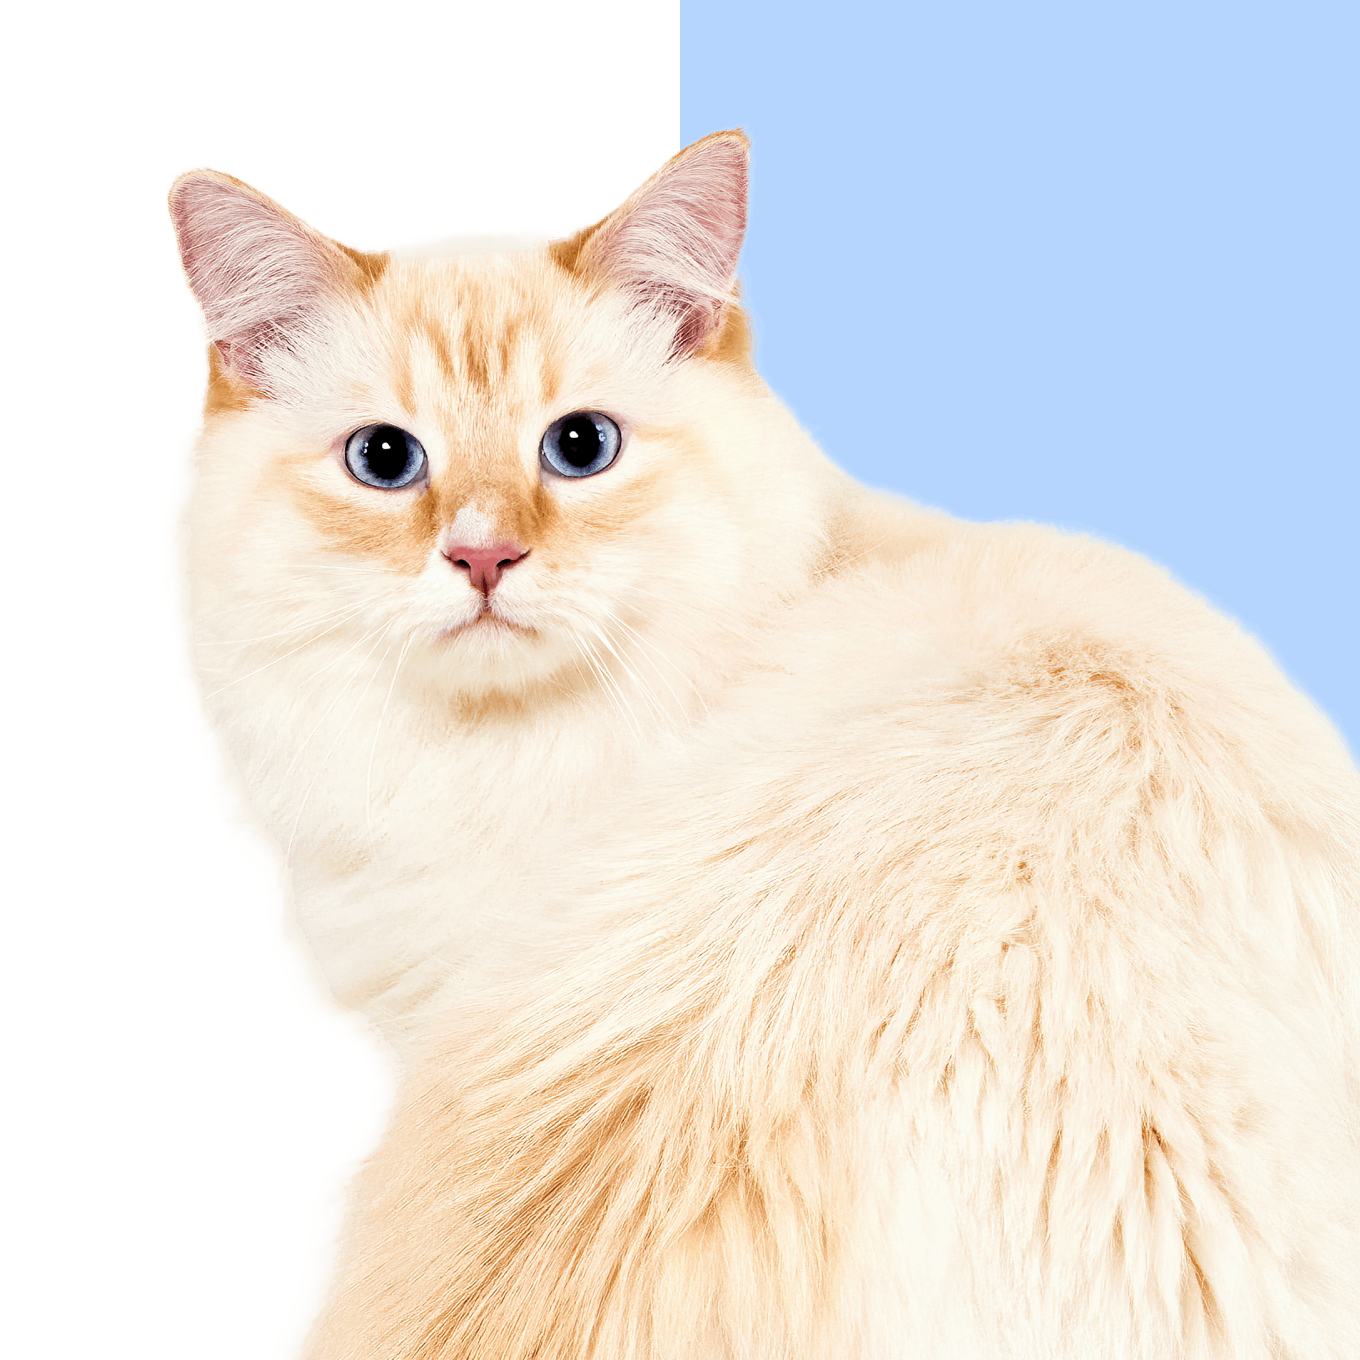 A white fluffy cat with blue eyes looks over its shoulder to camera.